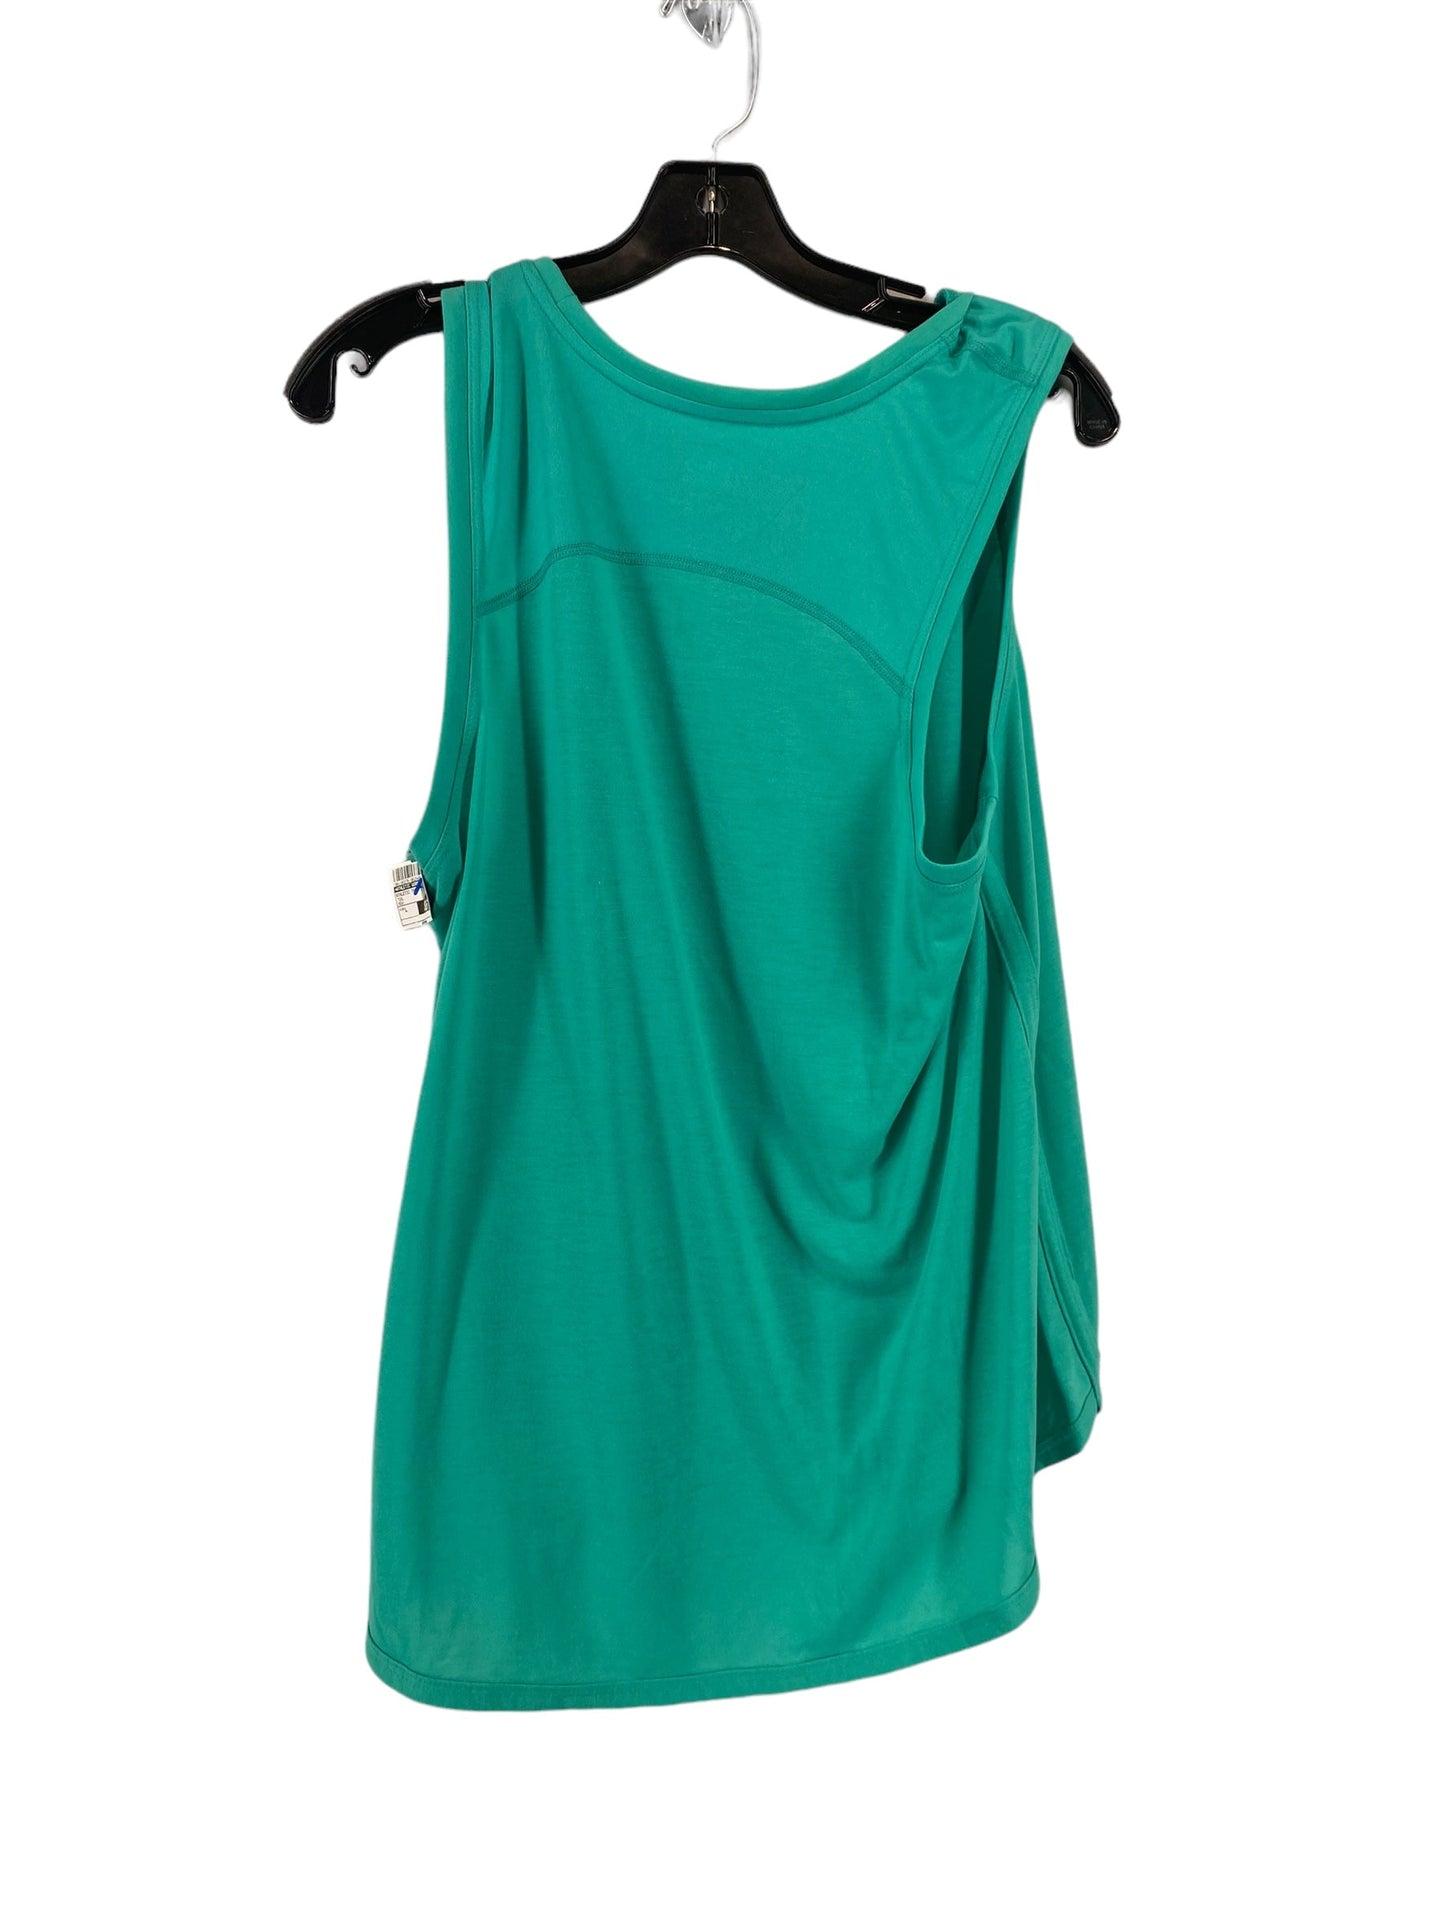 Teal Athletic Tank Top Athletic Works, Size L